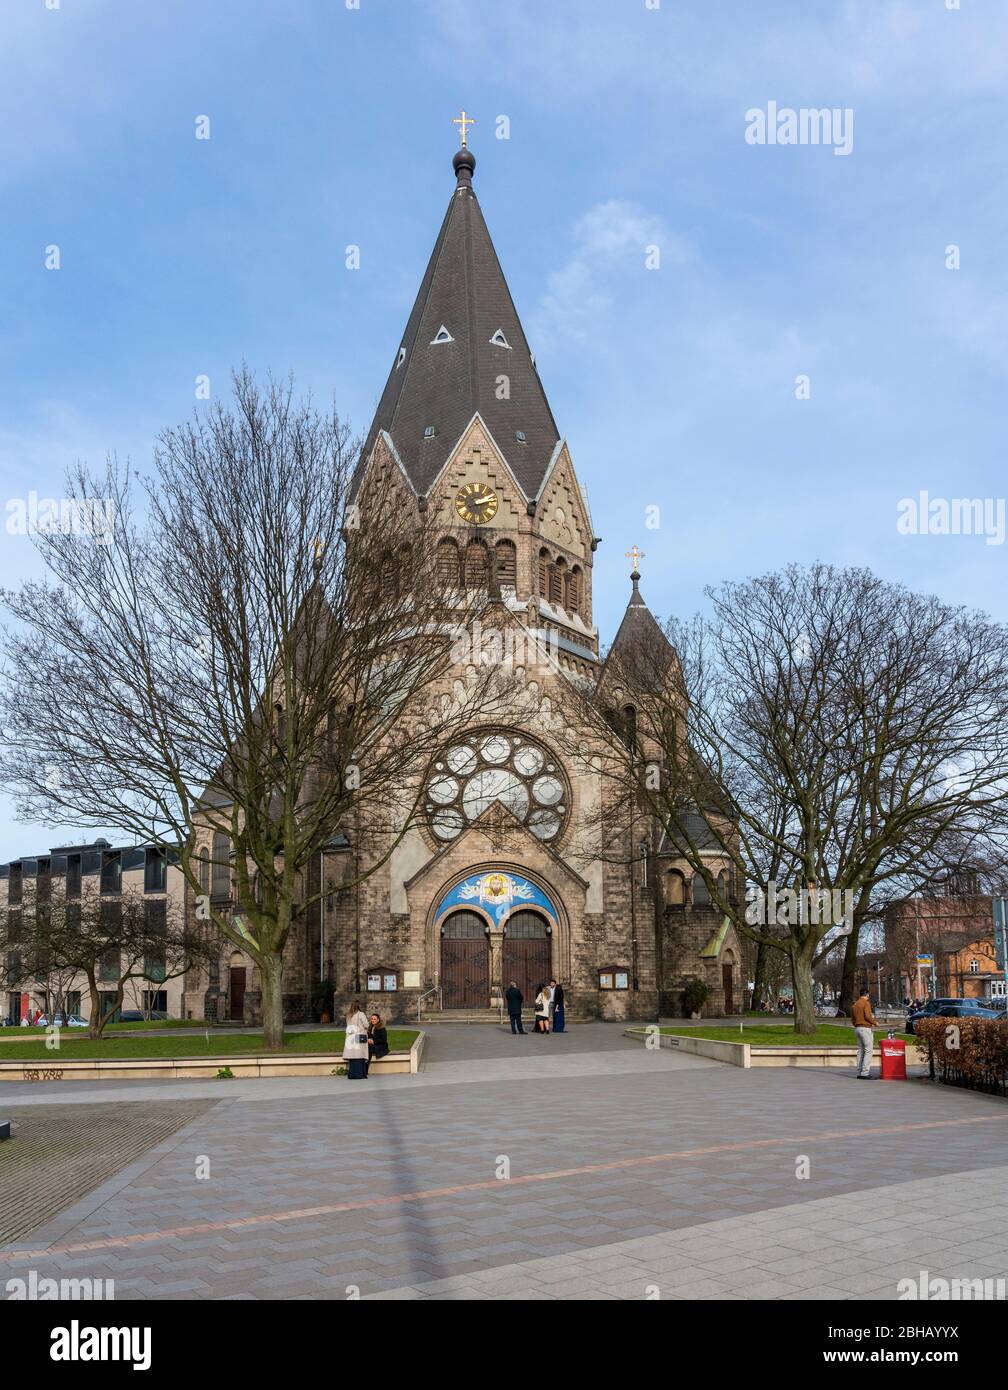 Germany, Hamburg, Church of St. John of Kronstadt. Former Evangelical Lutheran Grace Church. The church was consecrated on May 30, 2007 according to the orthodox tradition. Stock Photo